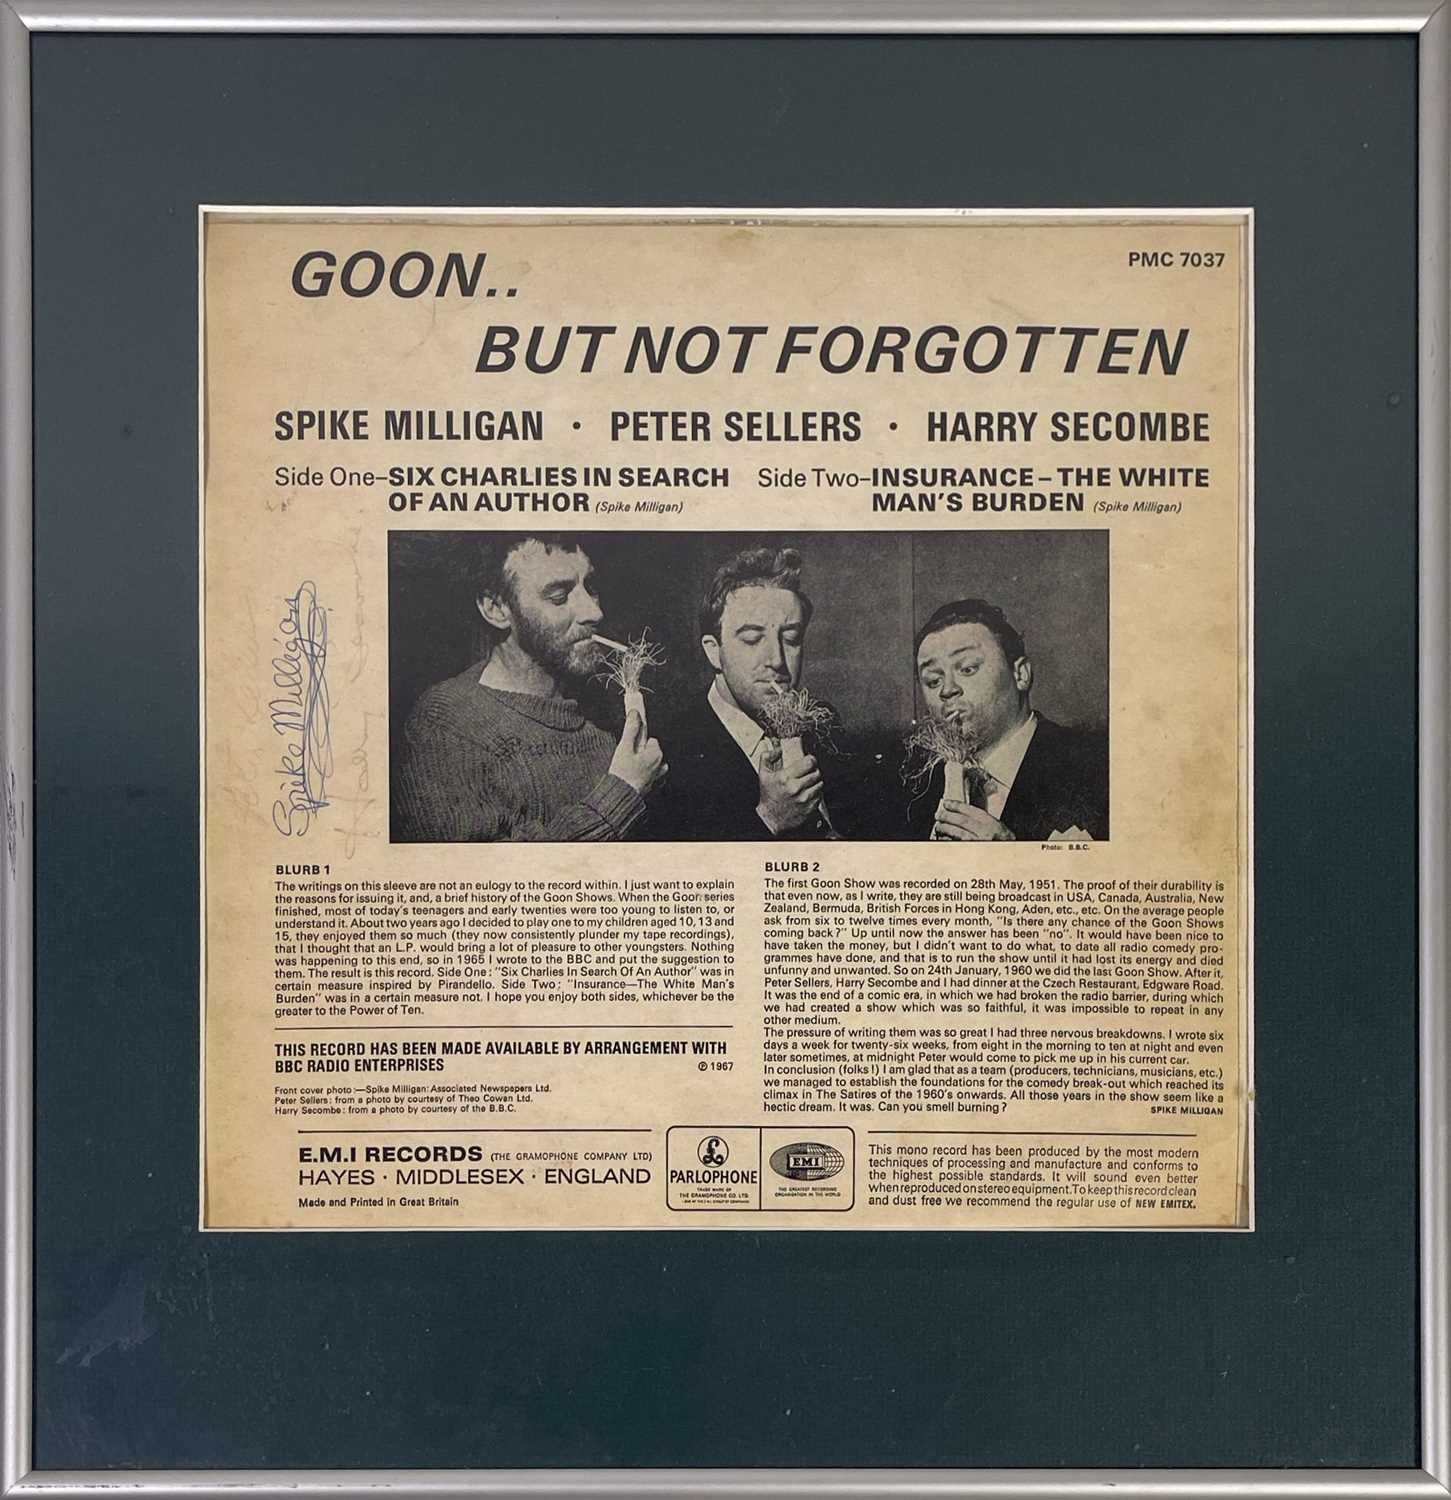 THE GOONS - LP SIGNED BY SPIKE MILLIGAN, PETER SELLERS, HARRY SECOMBE.